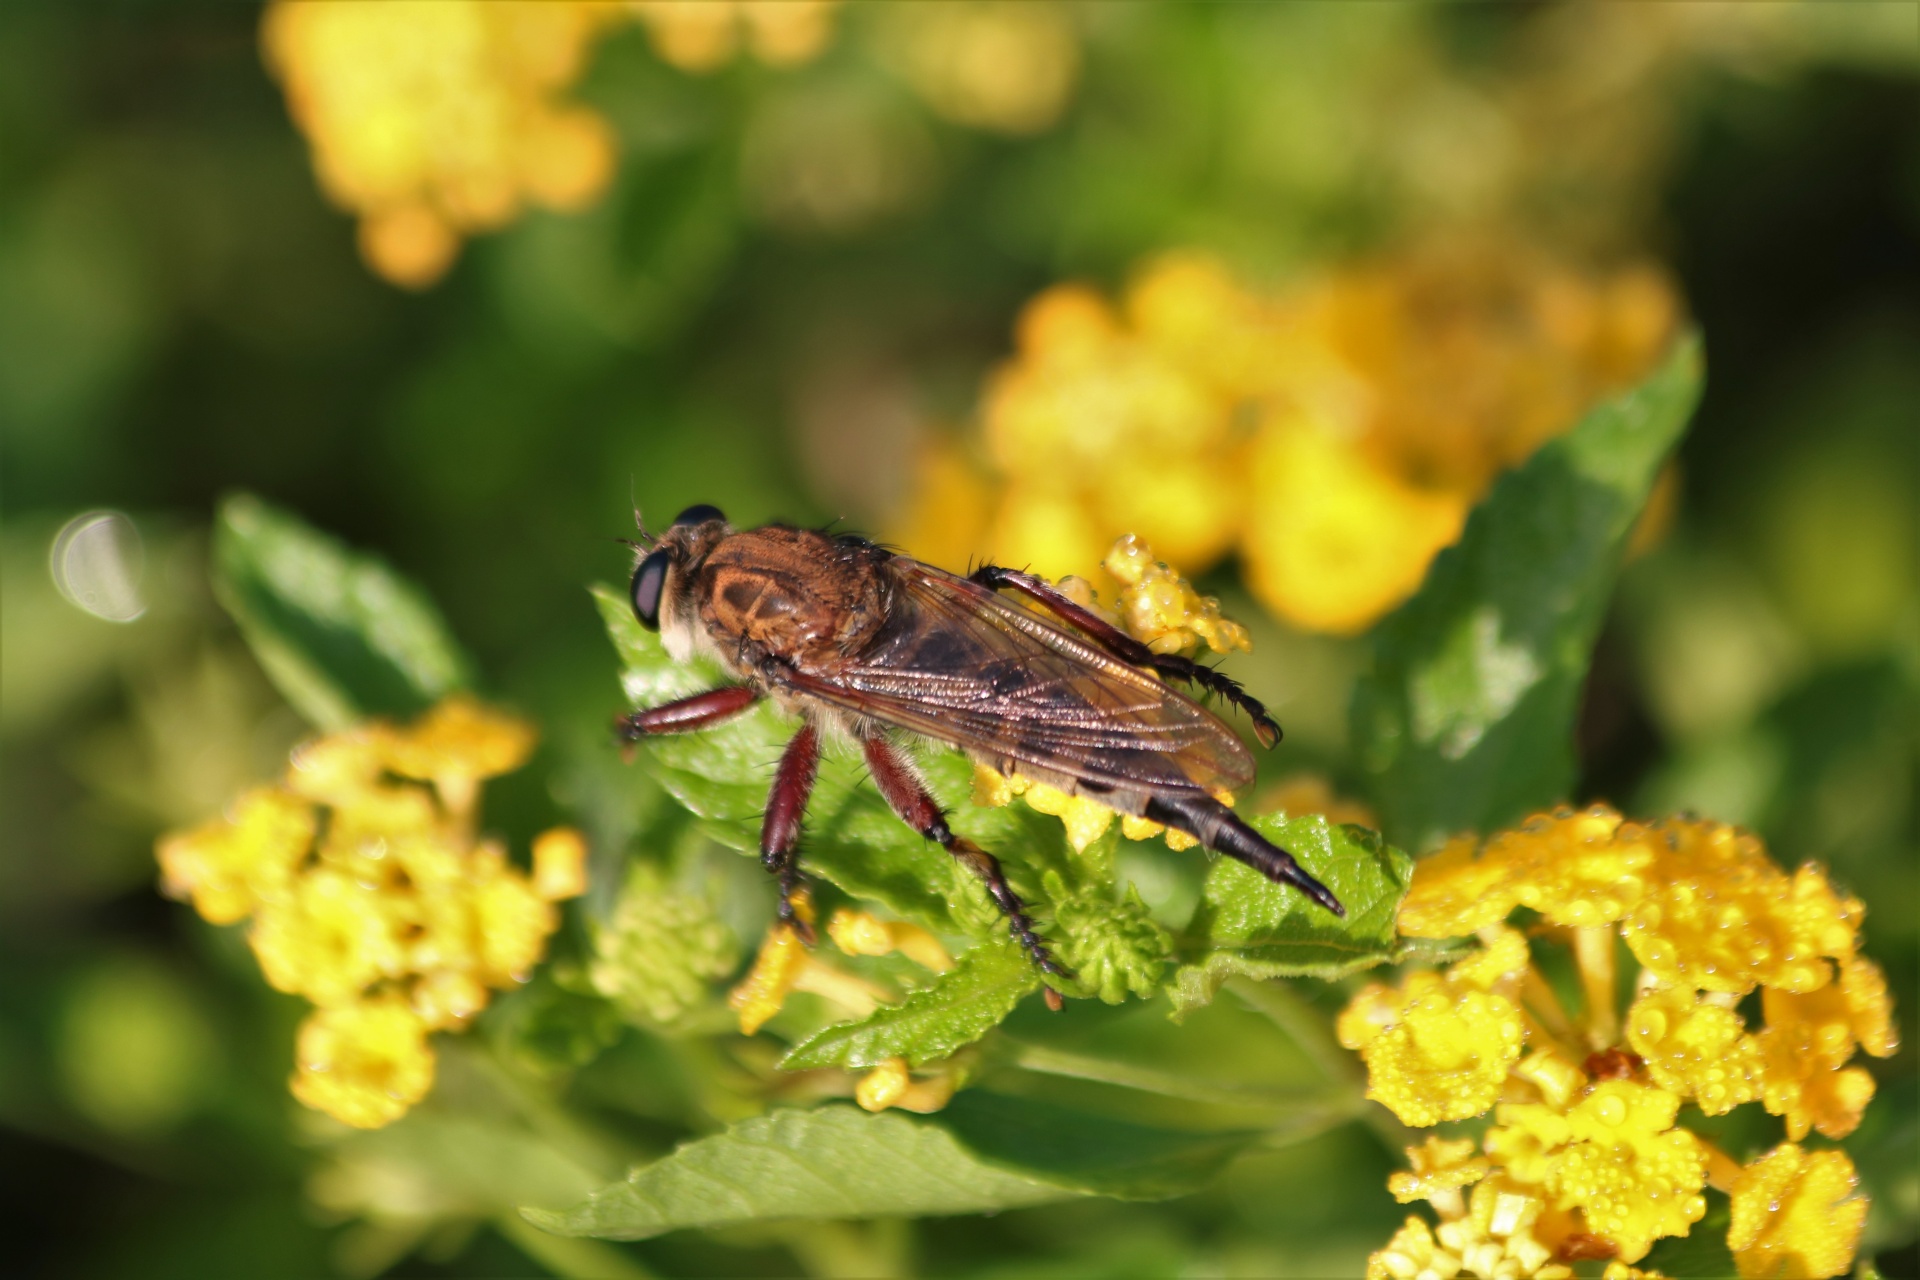 Close-up of a giant robber fly on yellow lantana flowers.